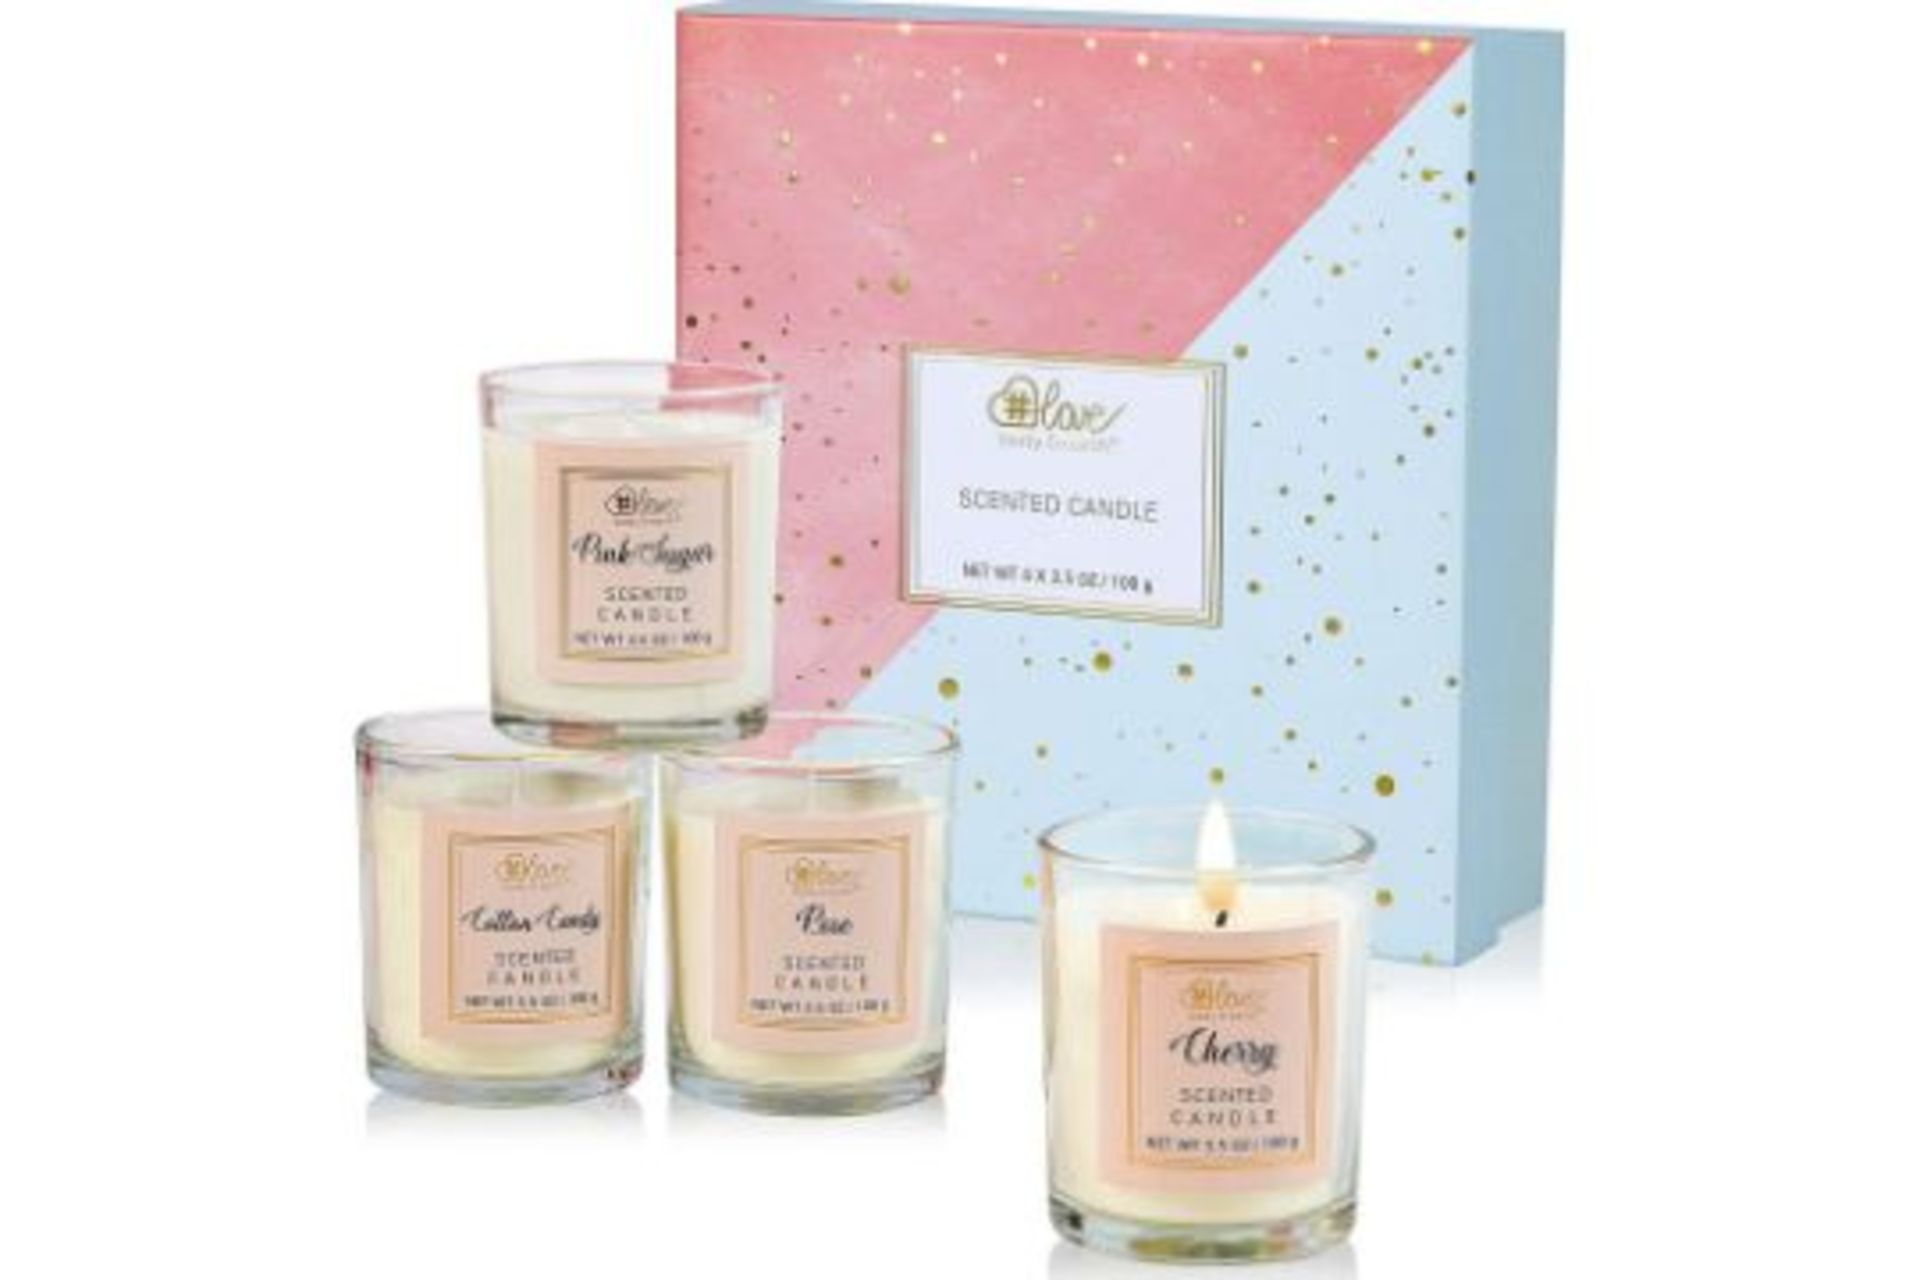 TRADE LOT 40 X New Boxed Sets of 4 Body & Earth Love Scented Candle Set. (BEL-SC-04) 4 FRAGRANCE